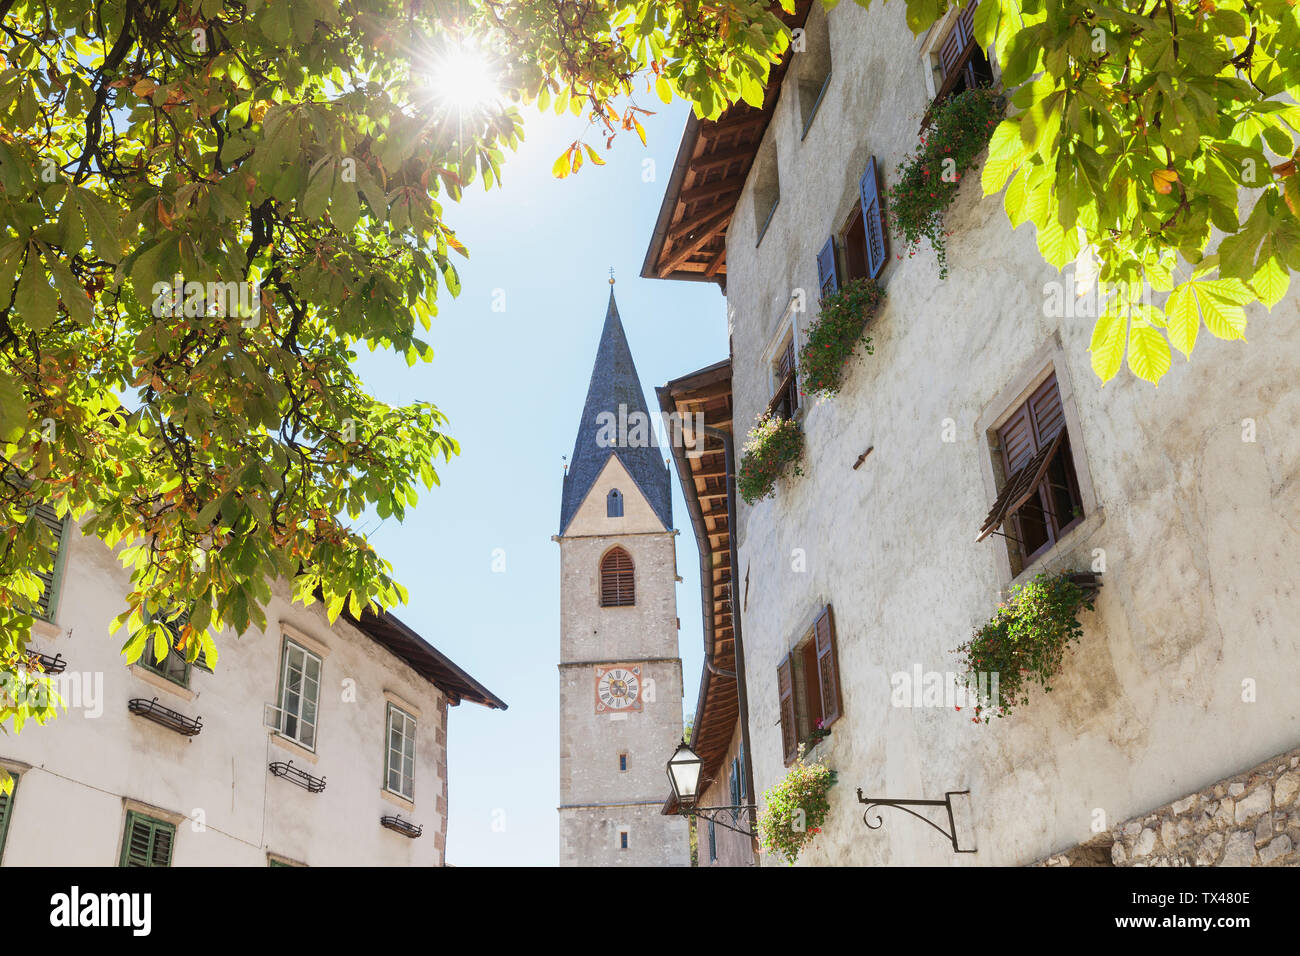 Italy, South Tyrol, Margreid, South Tyrol Wine Route, village view with church spire Stock Photo